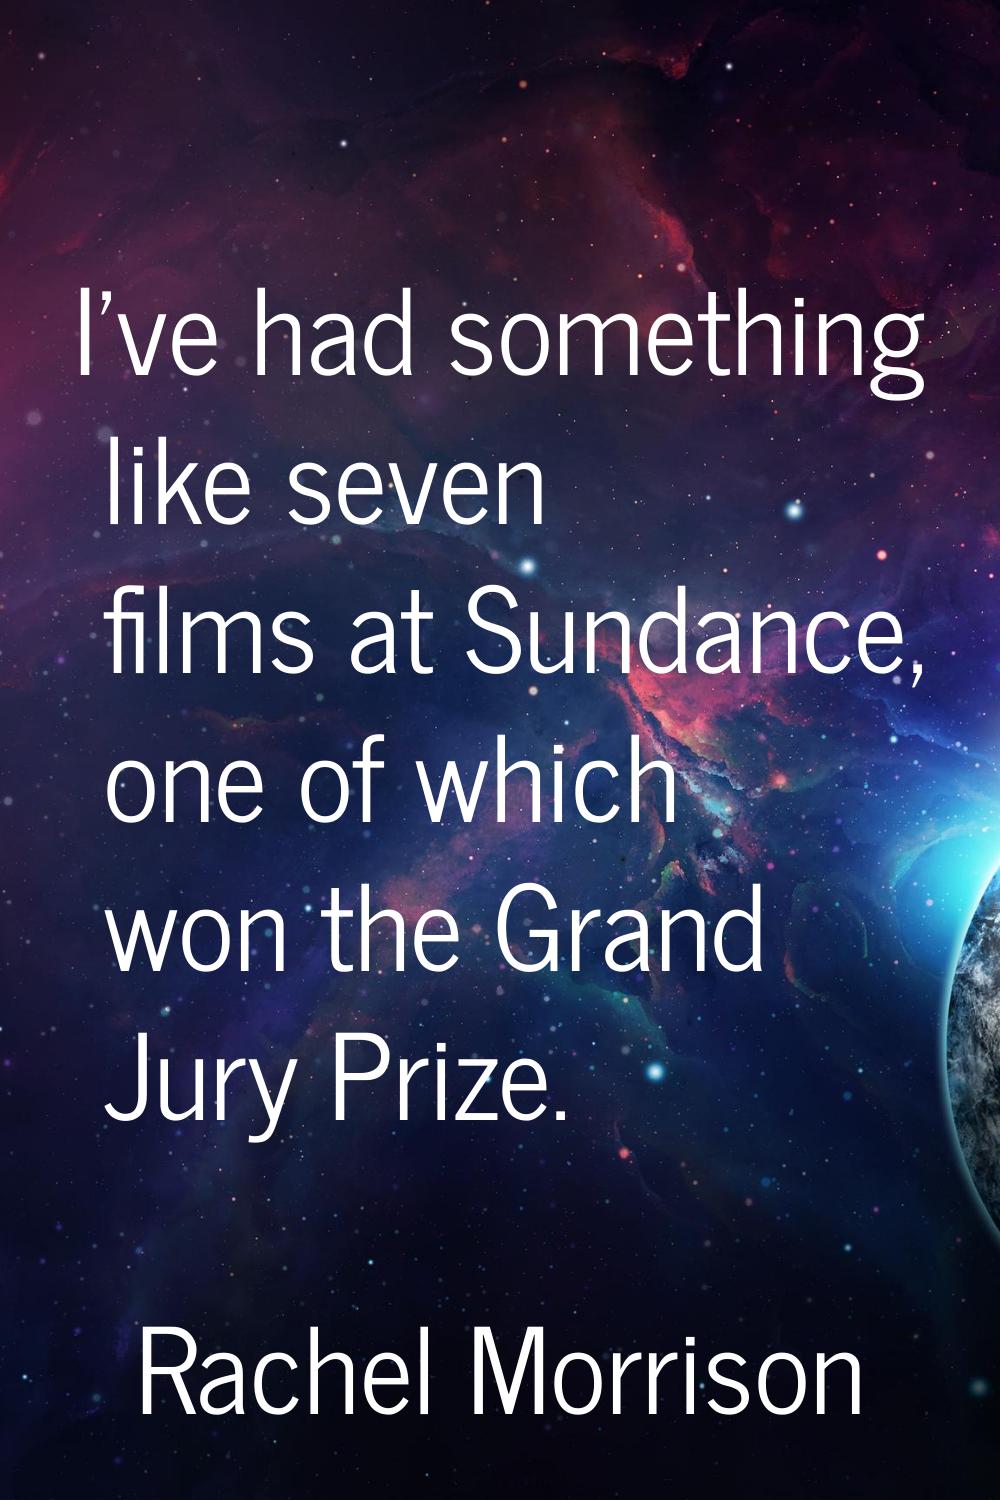 I've had something like seven films at Sundance, one of which won the Grand Jury Prize.